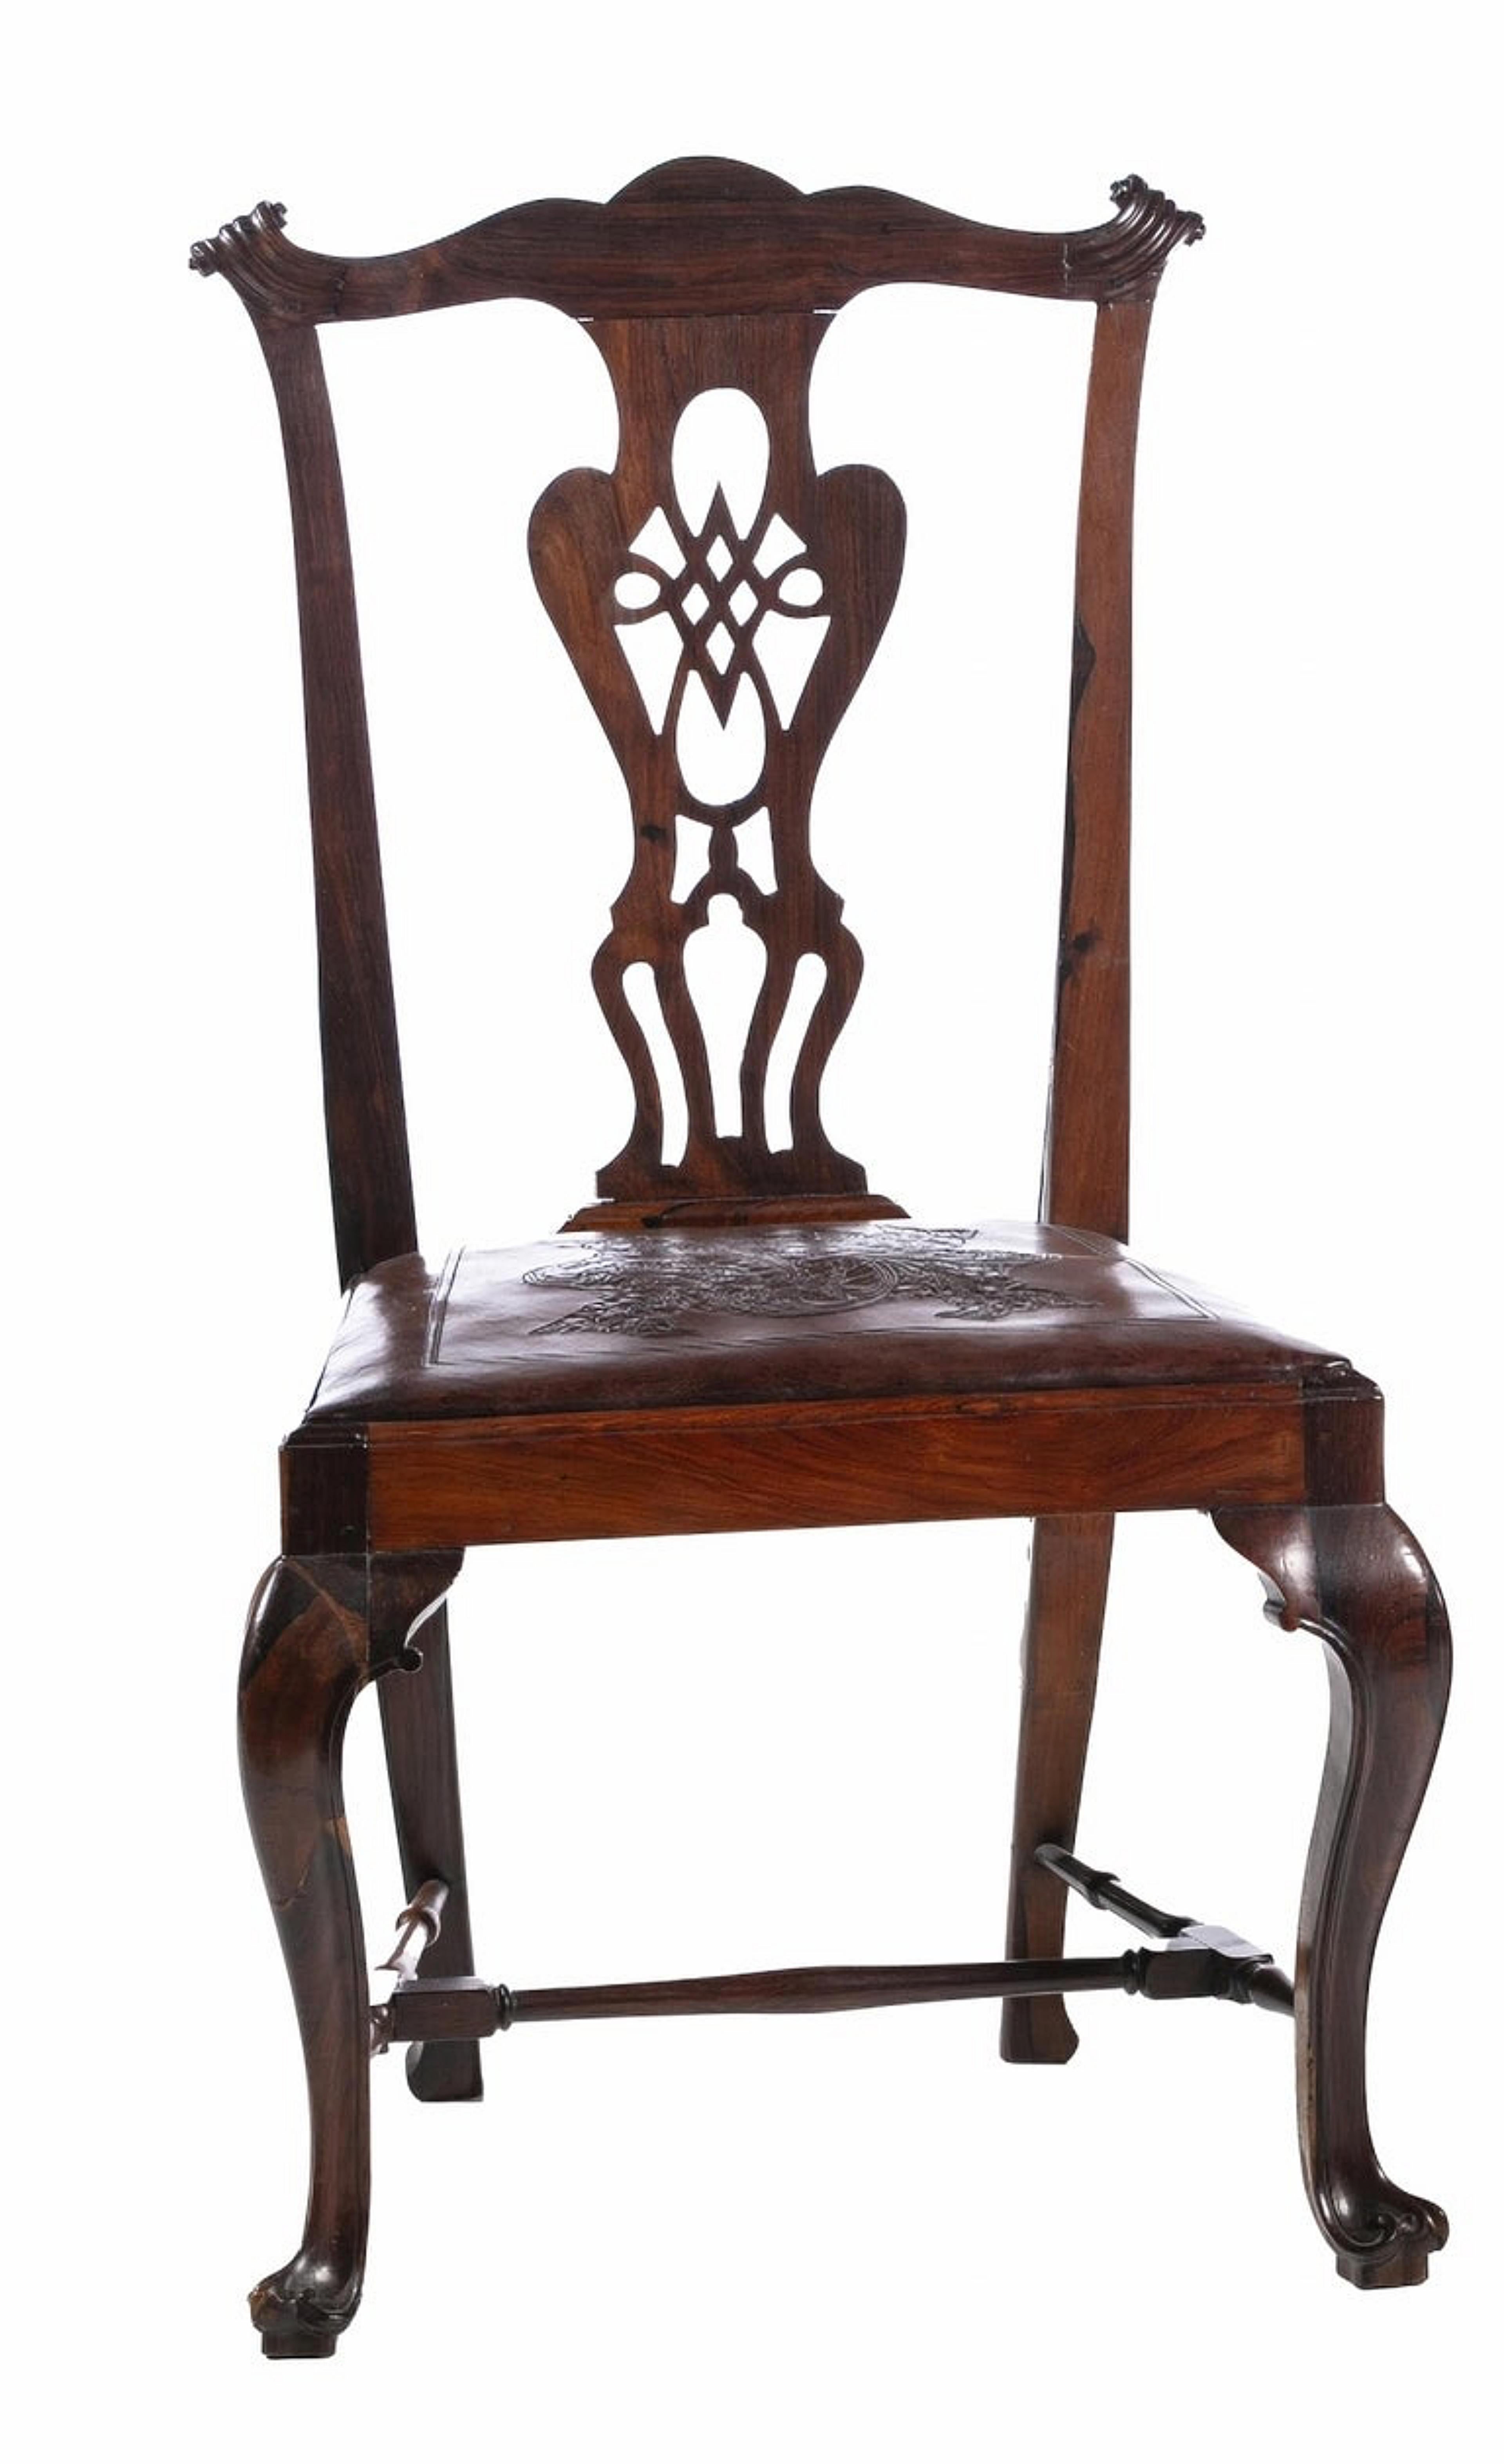 Portuguese PAIR OF PORTUGUESE CHAIRS 18th Century For Sale